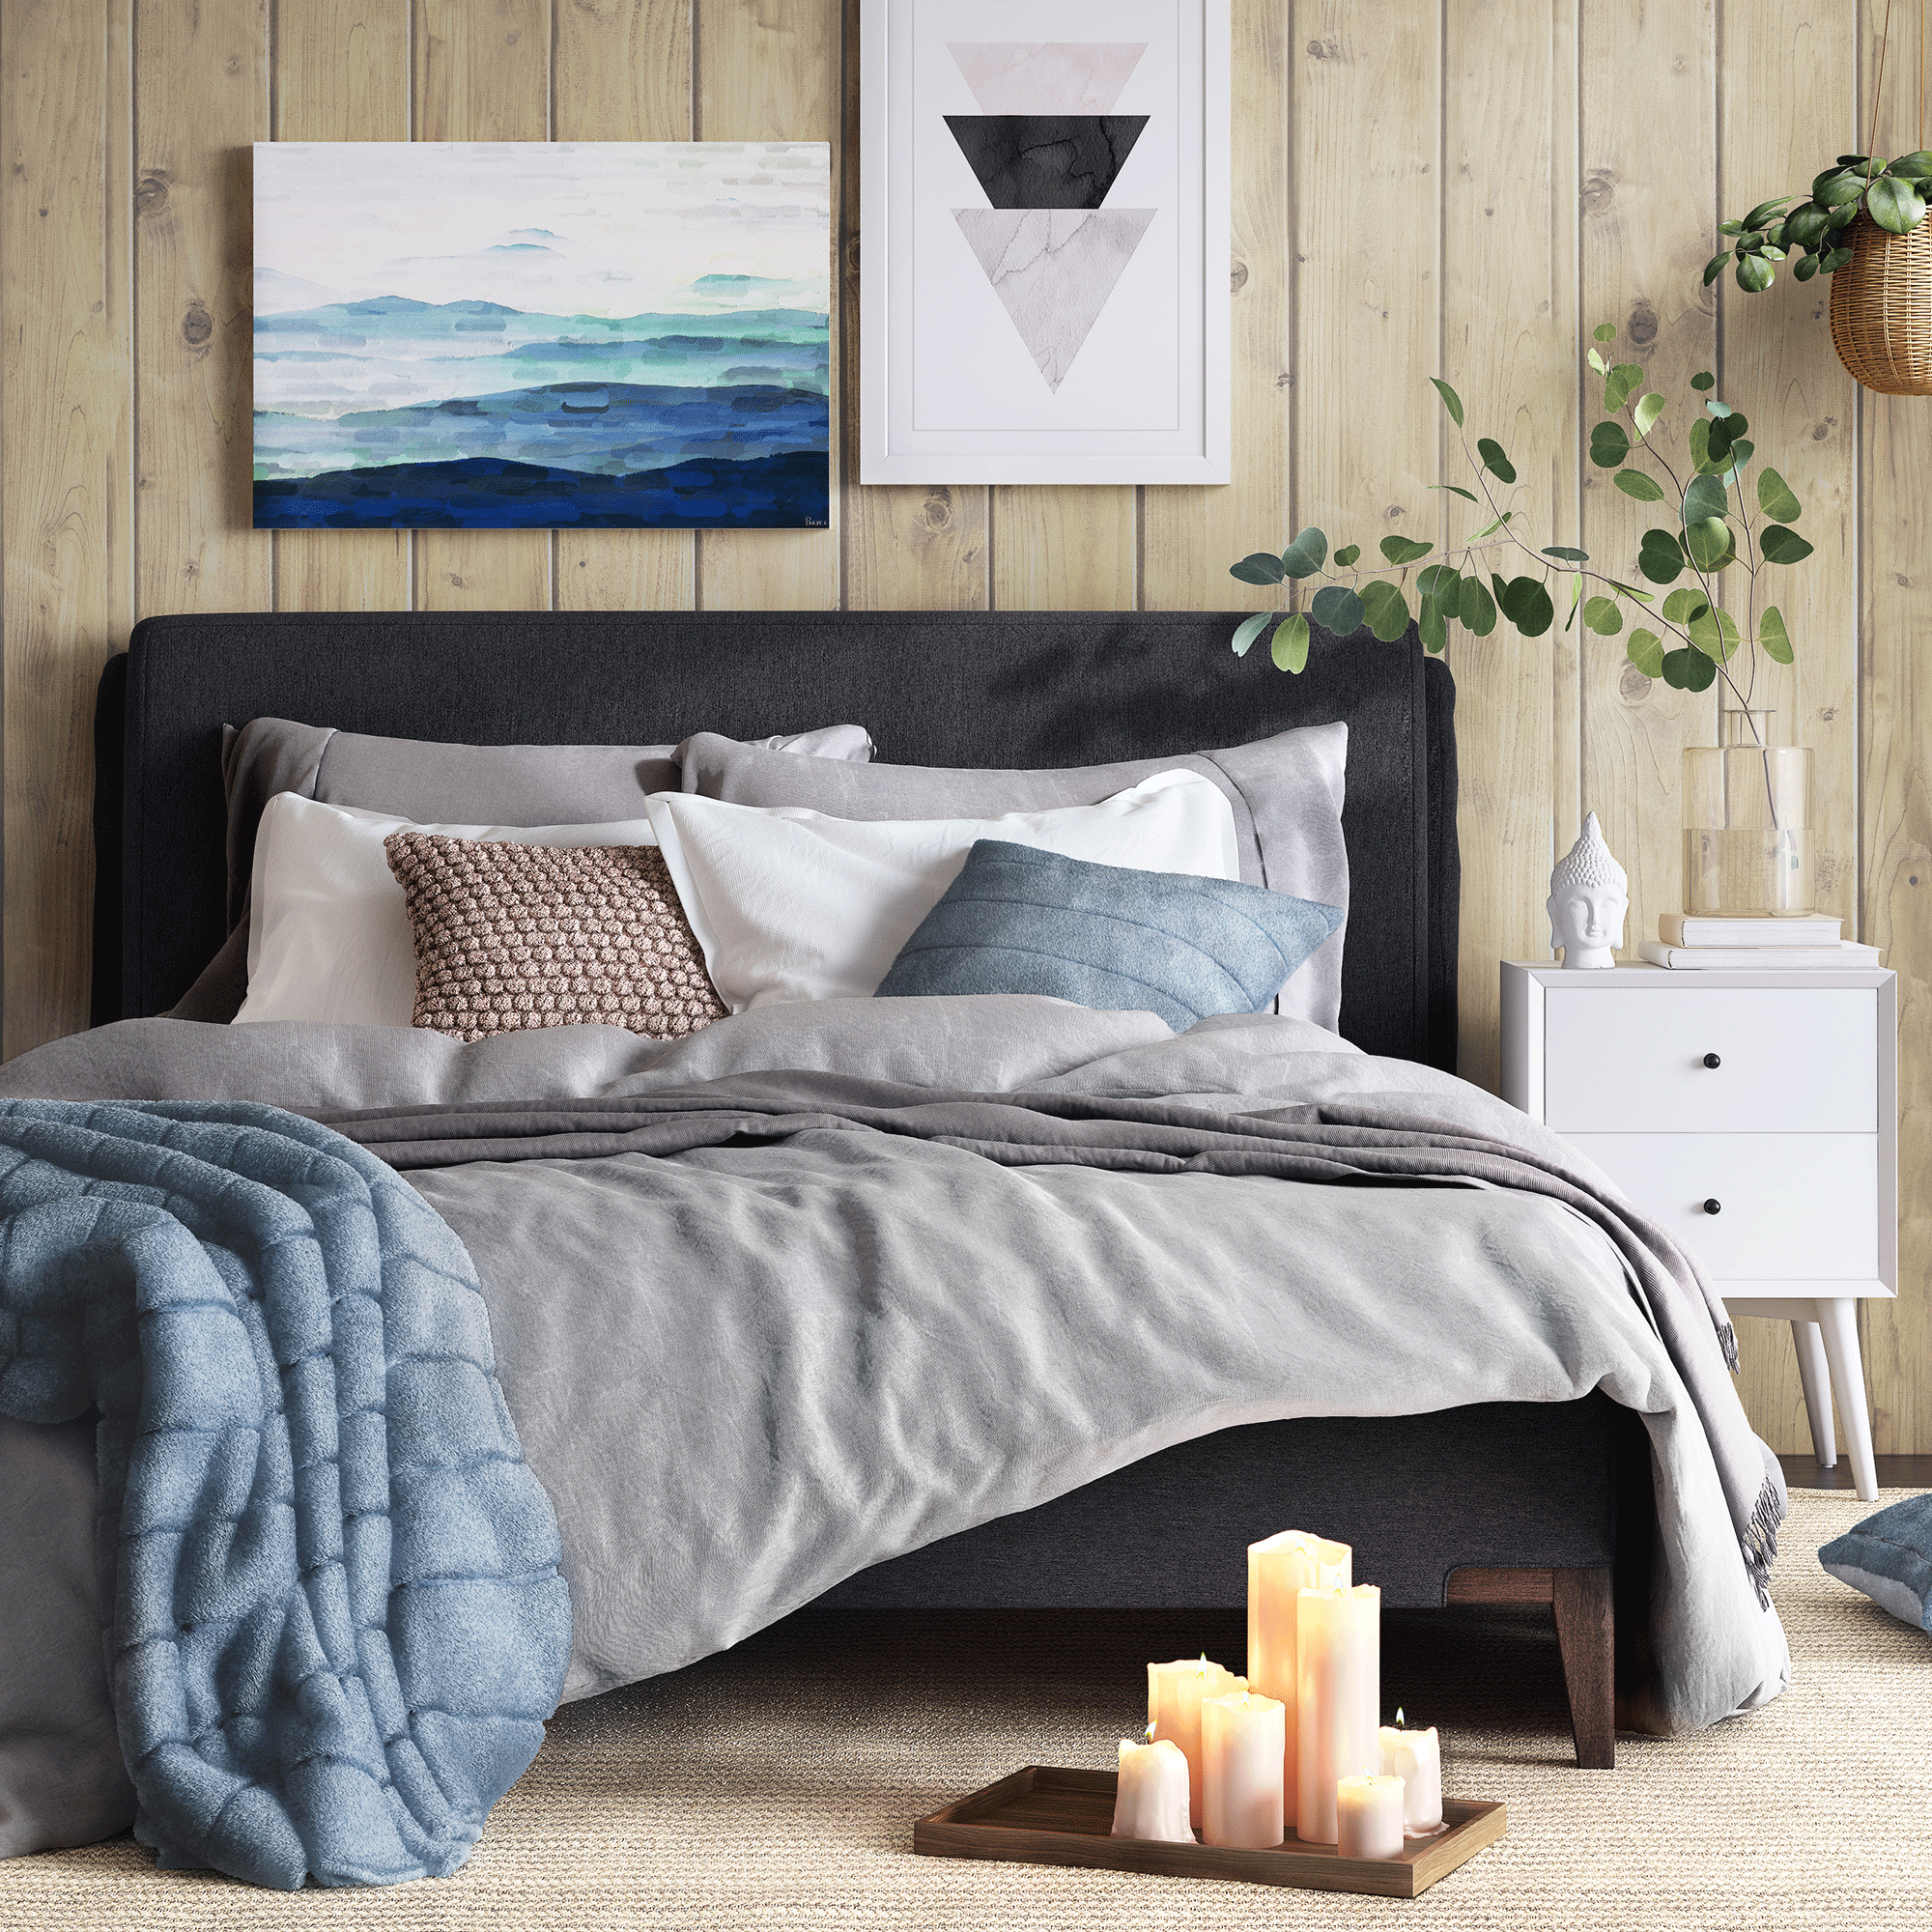 Grey bed with blankets and white walls